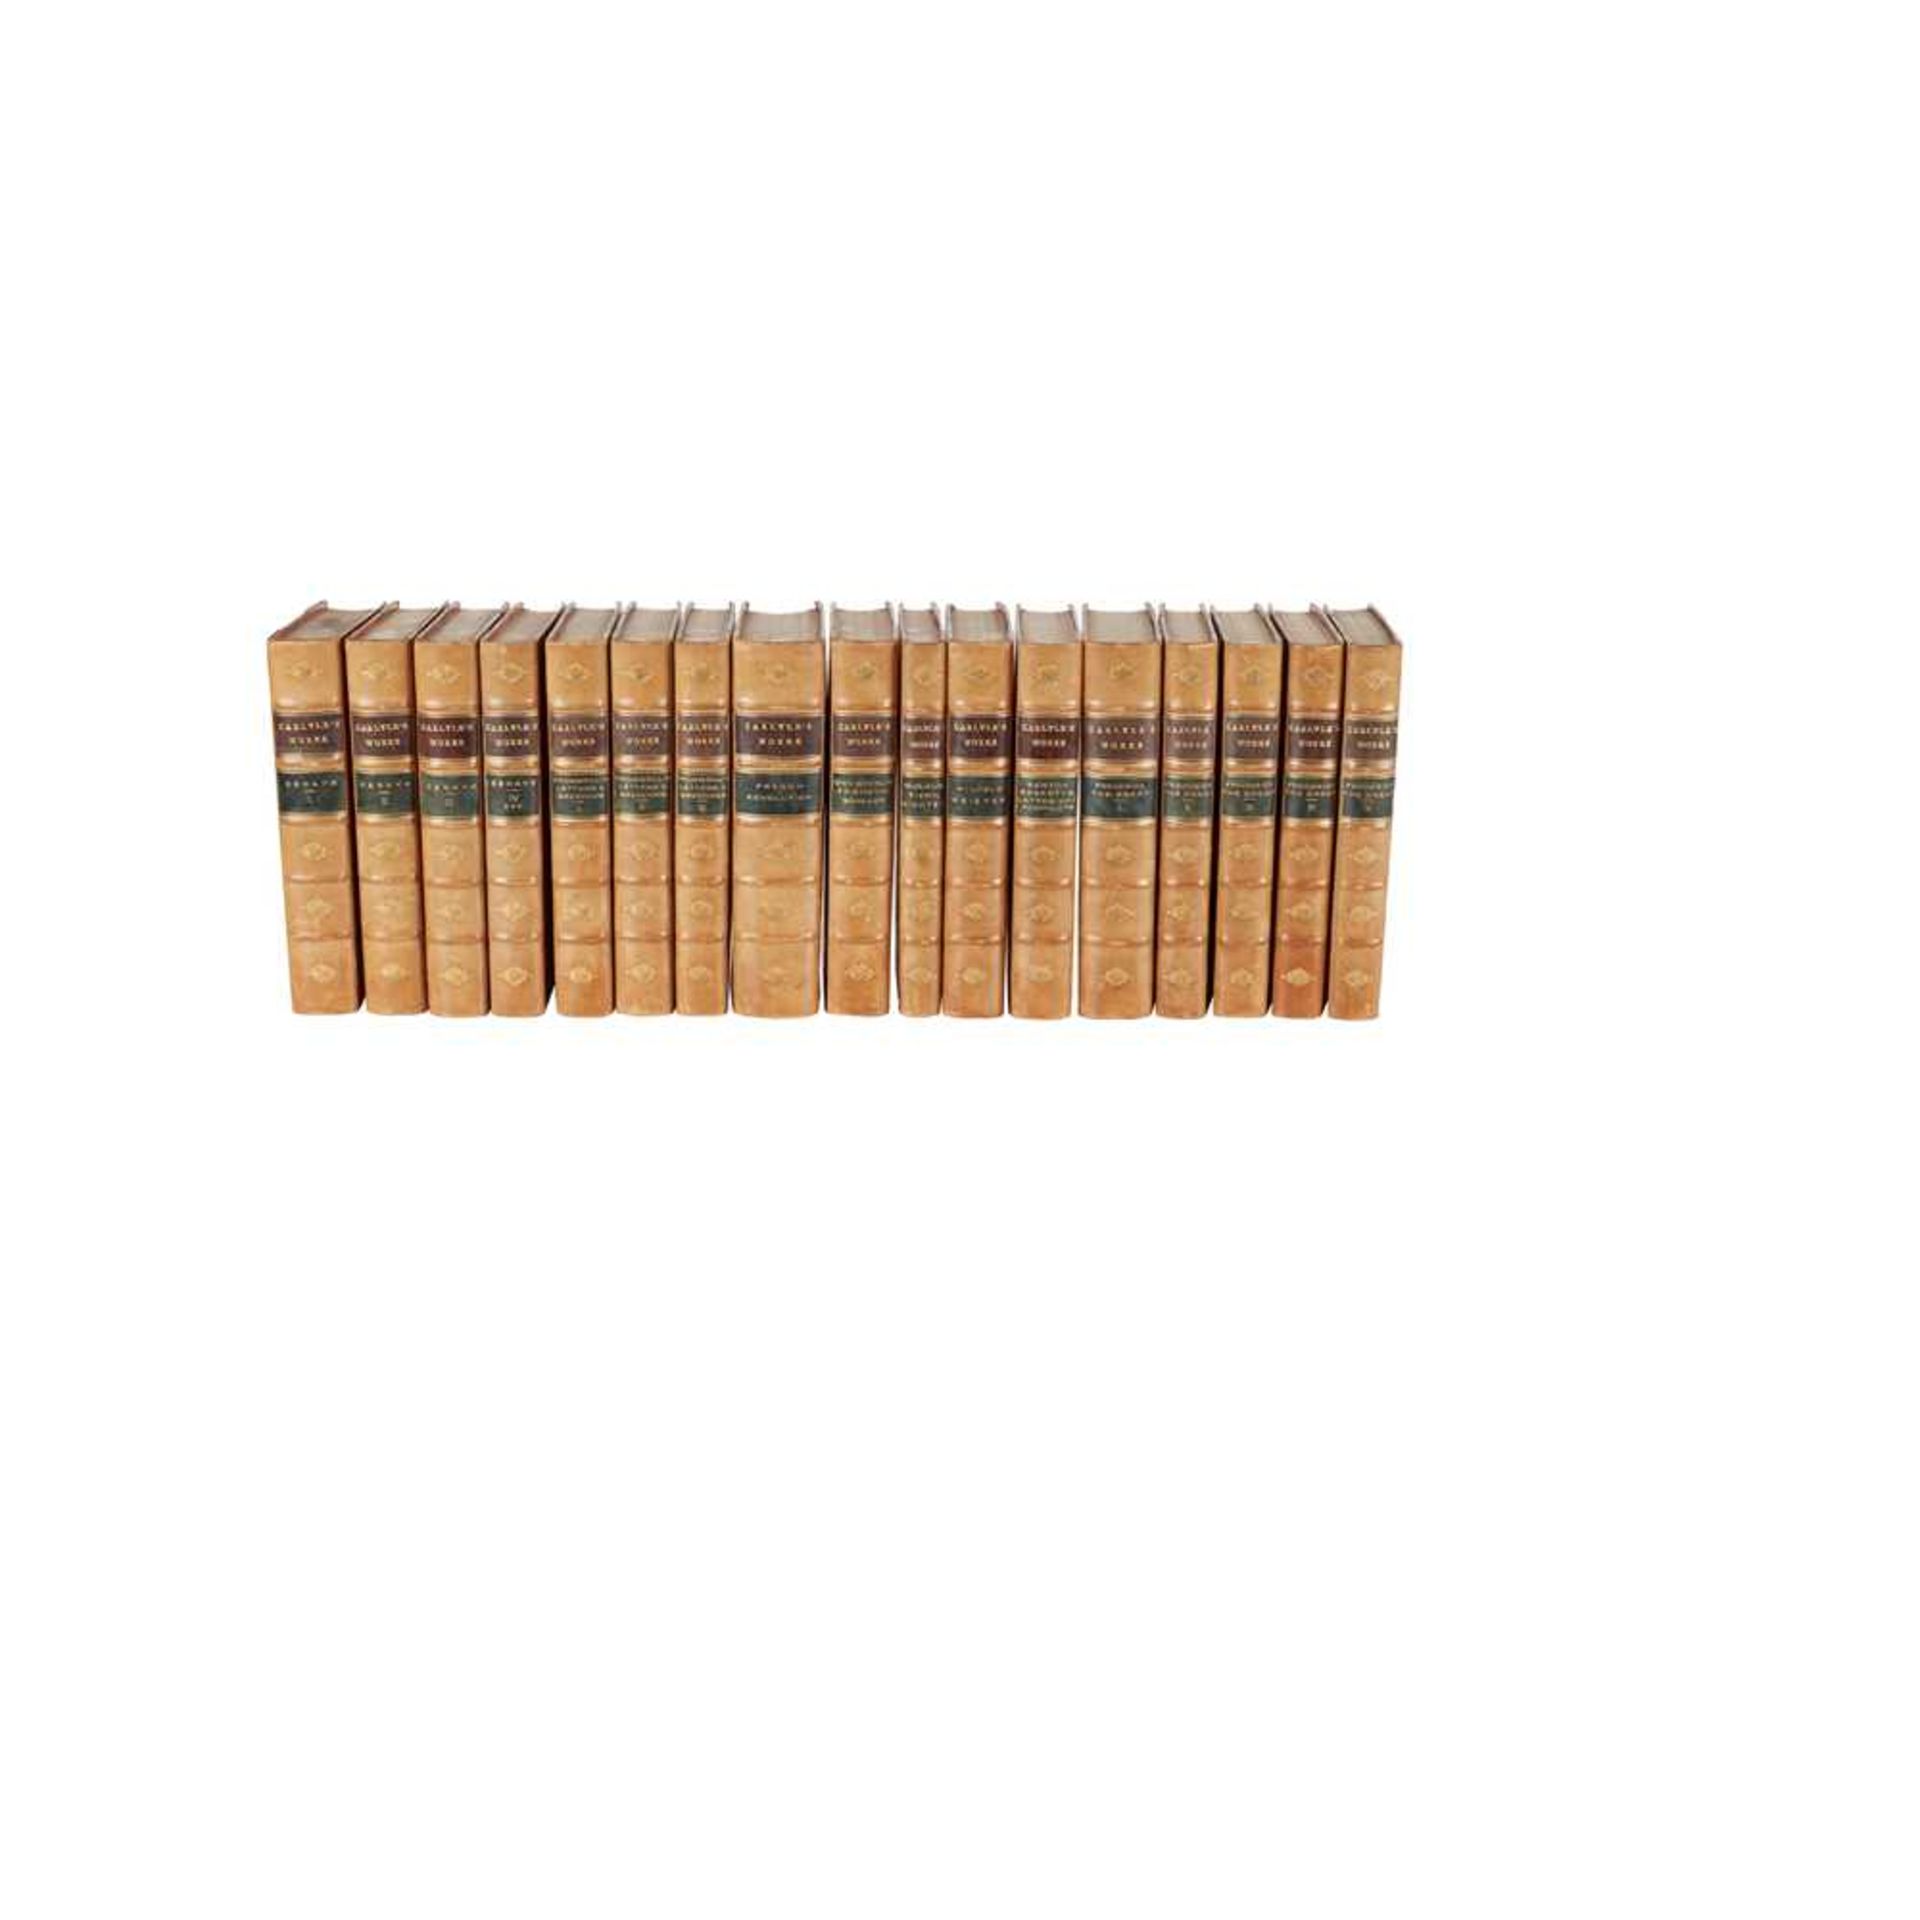 Bindings - George Eliot, Thomas Carlyle, and W.M. Thackeray 50 volumes, comprising - Image 2 of 4